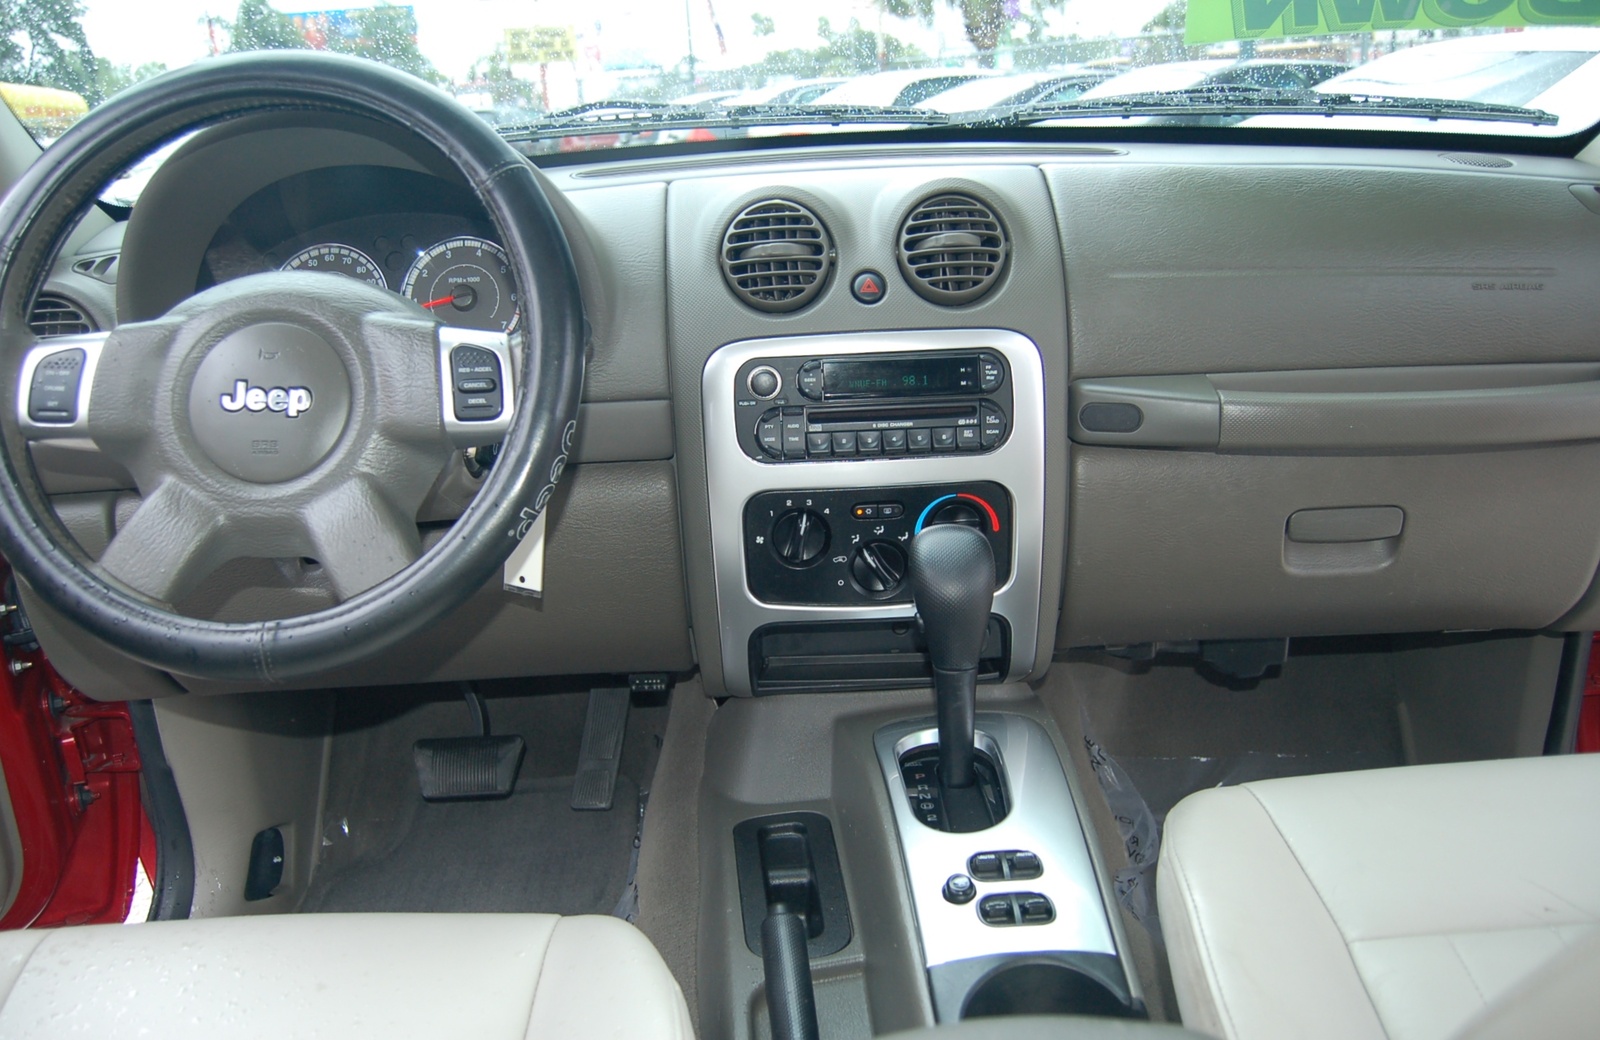 2006 Jeep Liberty: Prices, Reviews & Pictures - CarGurus